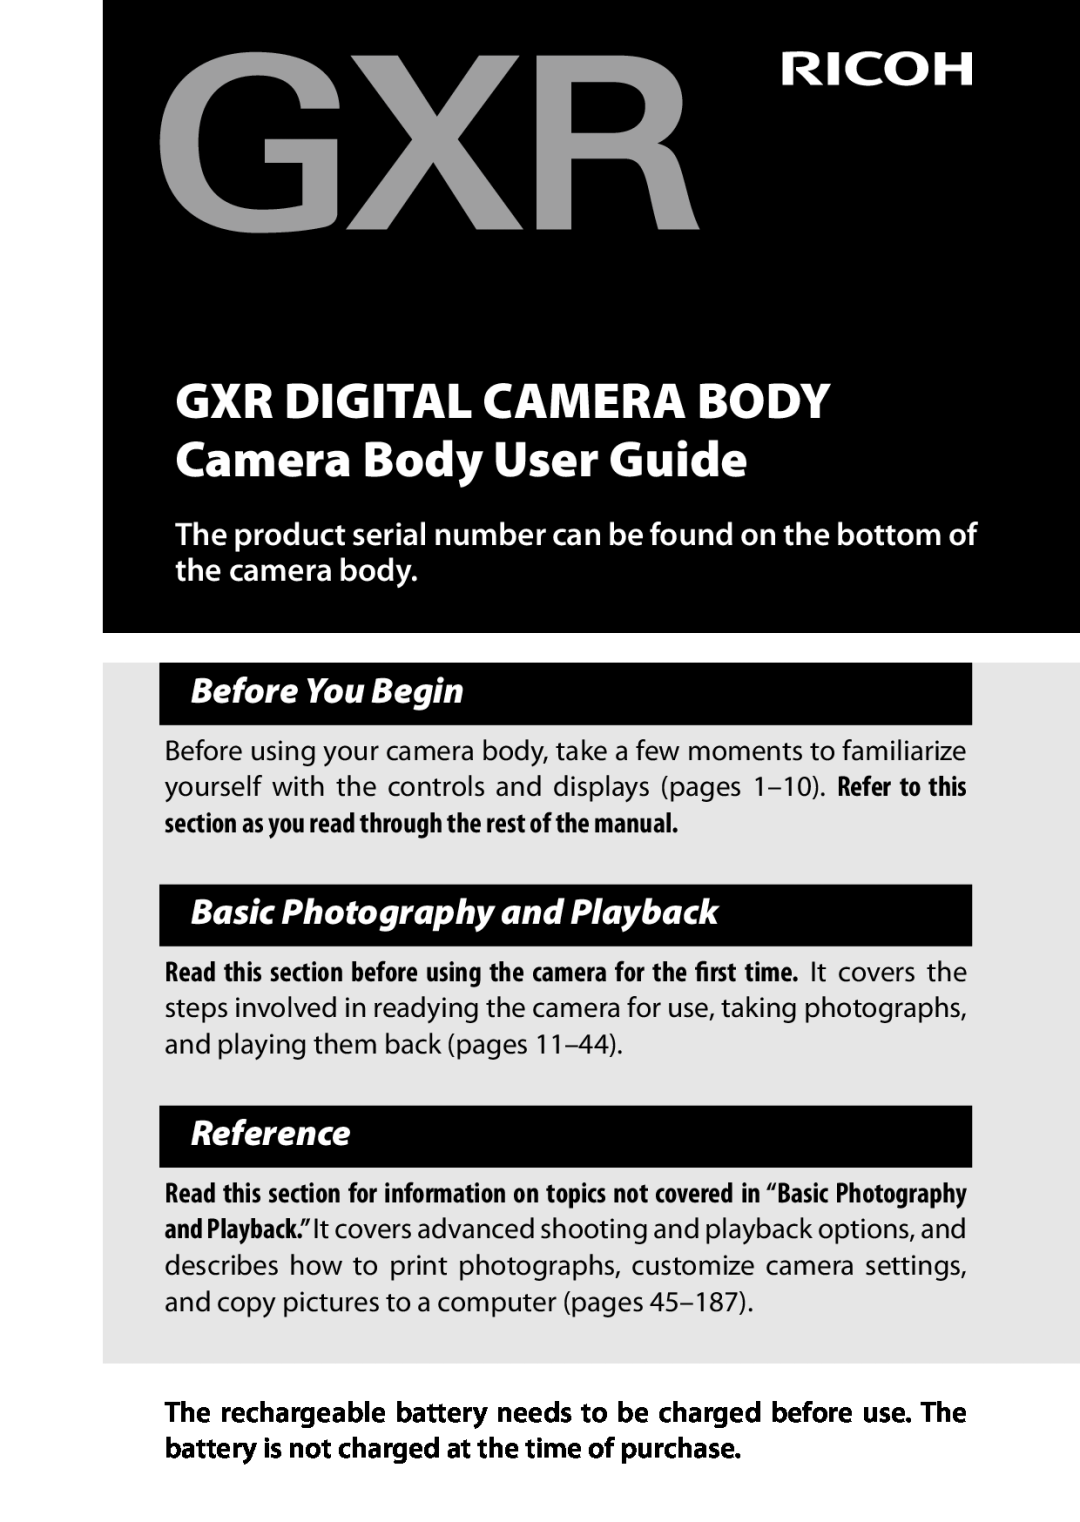 Ricoh 170543 manual GXR DIGITAL CAMERA BODY Camera Body User Guide, Before You Begin, Basic Photography and Playback 